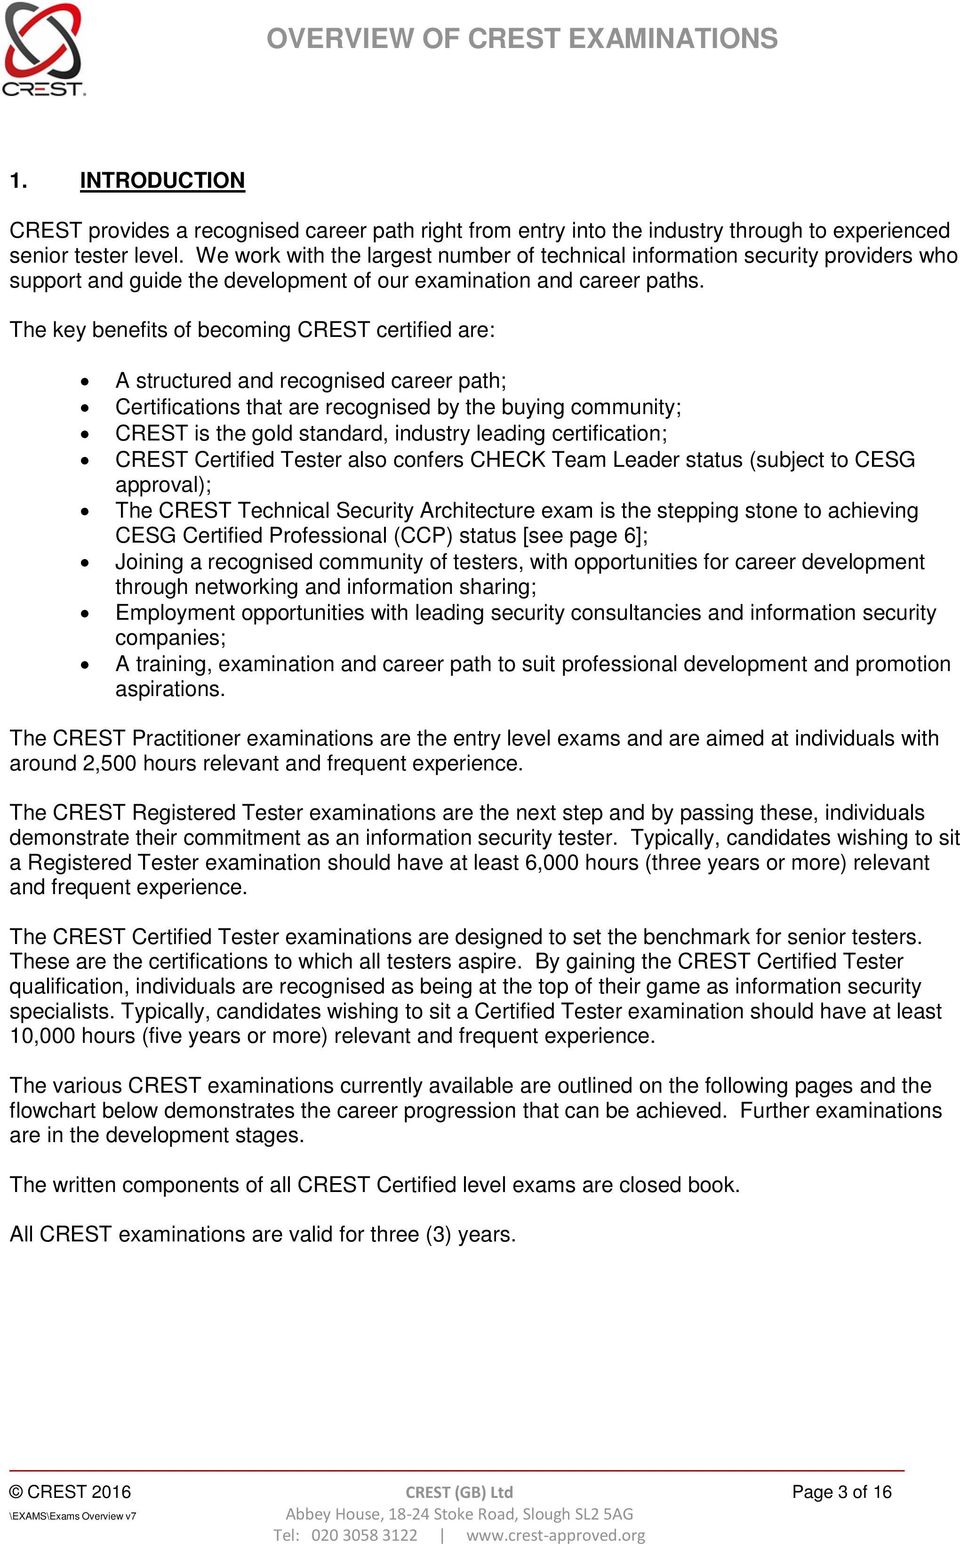 The key benefits of becoming CREST certified are: A structured and recognised career path; Certifications that are recognised by the buying community; CREST is the gold standard, industry leading